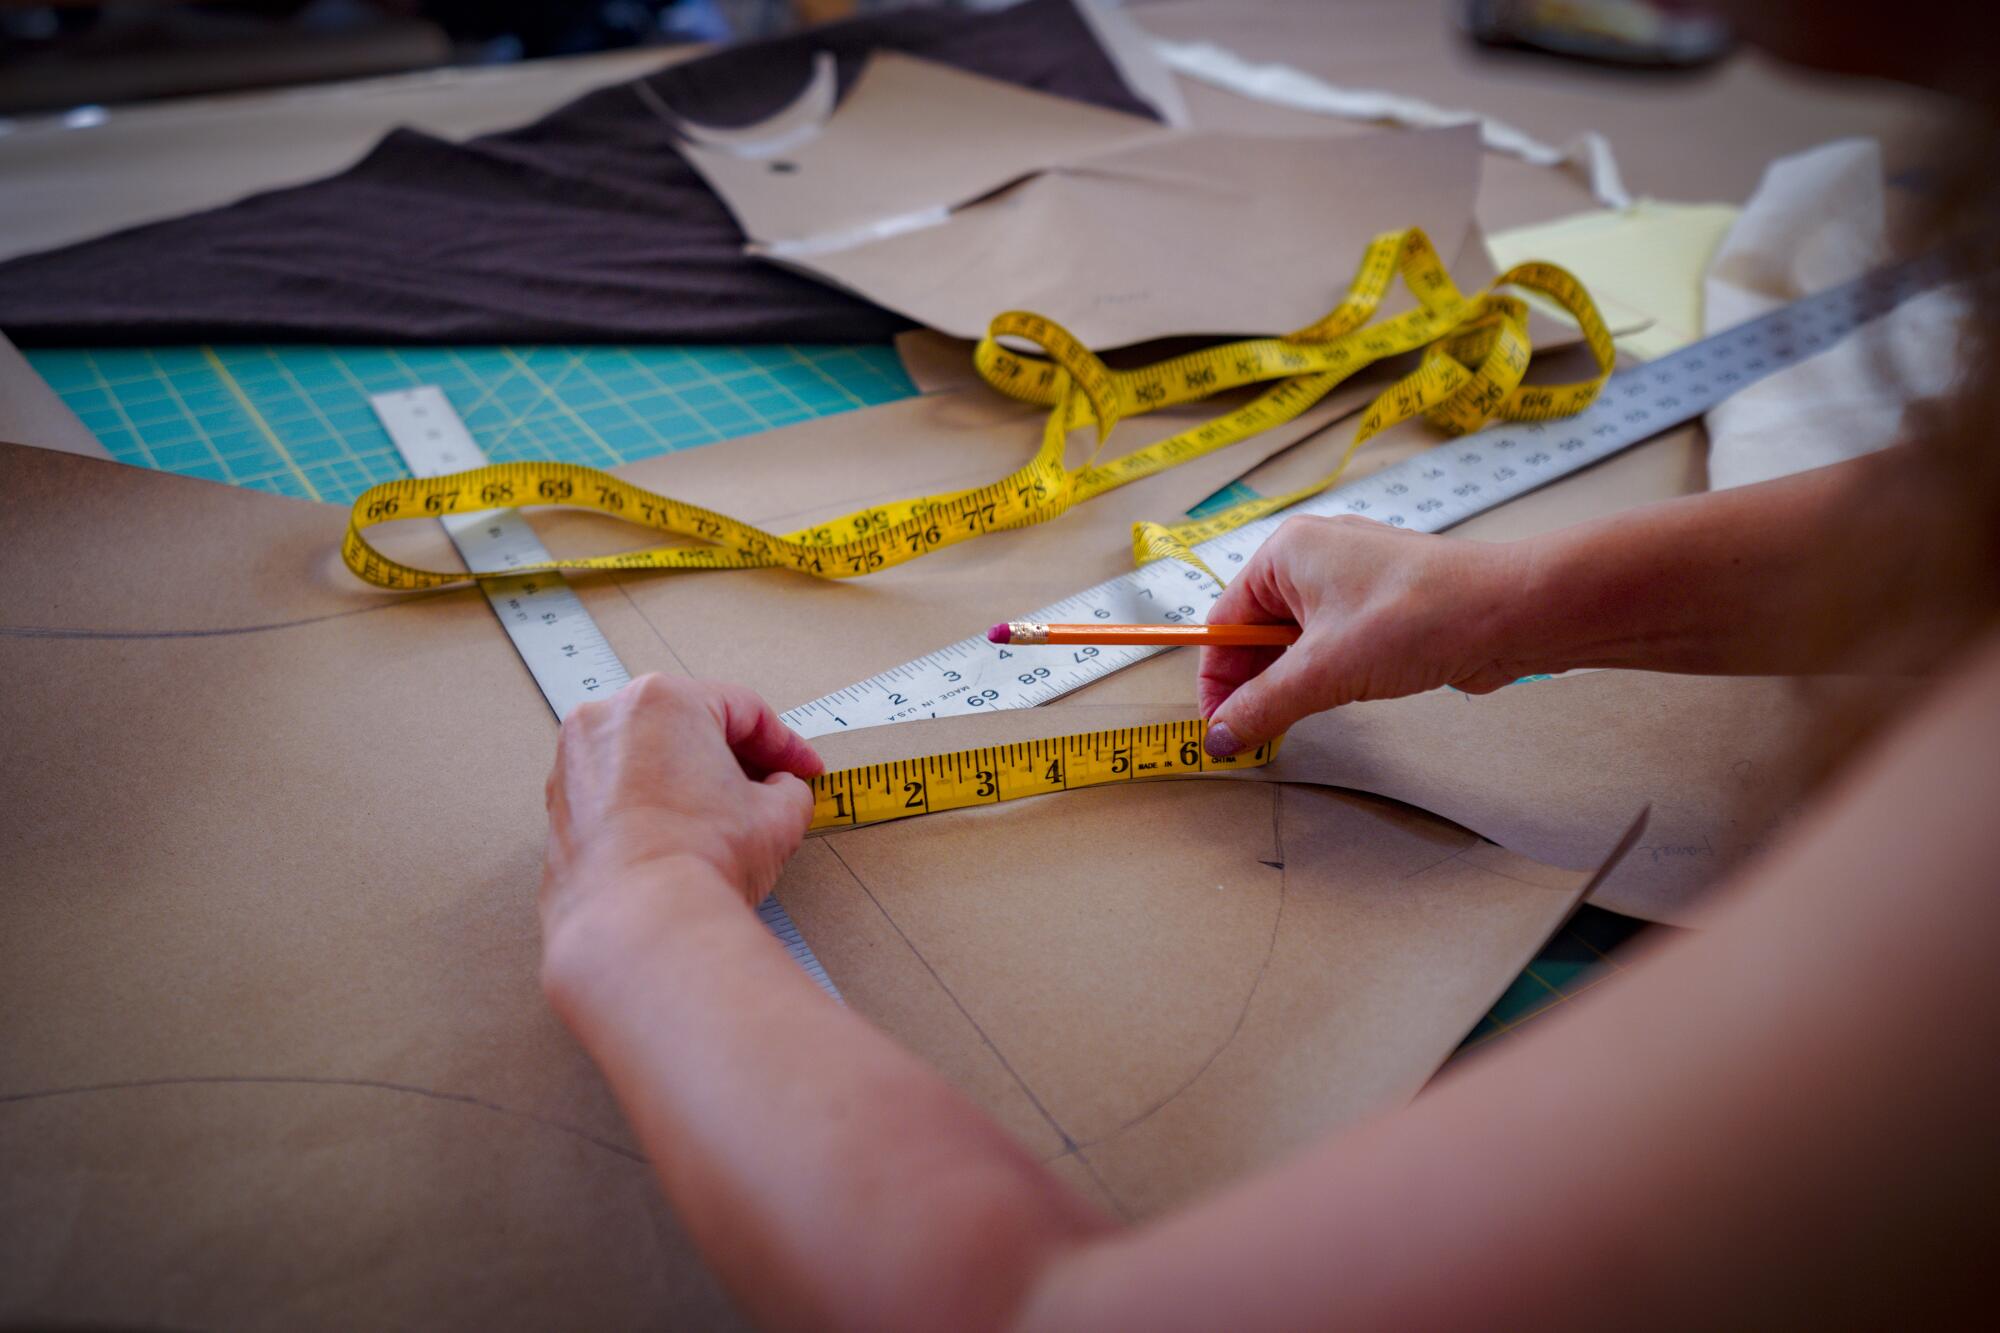 Anastasia Pautova, costume shop manager, creates an original sewing pattern for a costume.